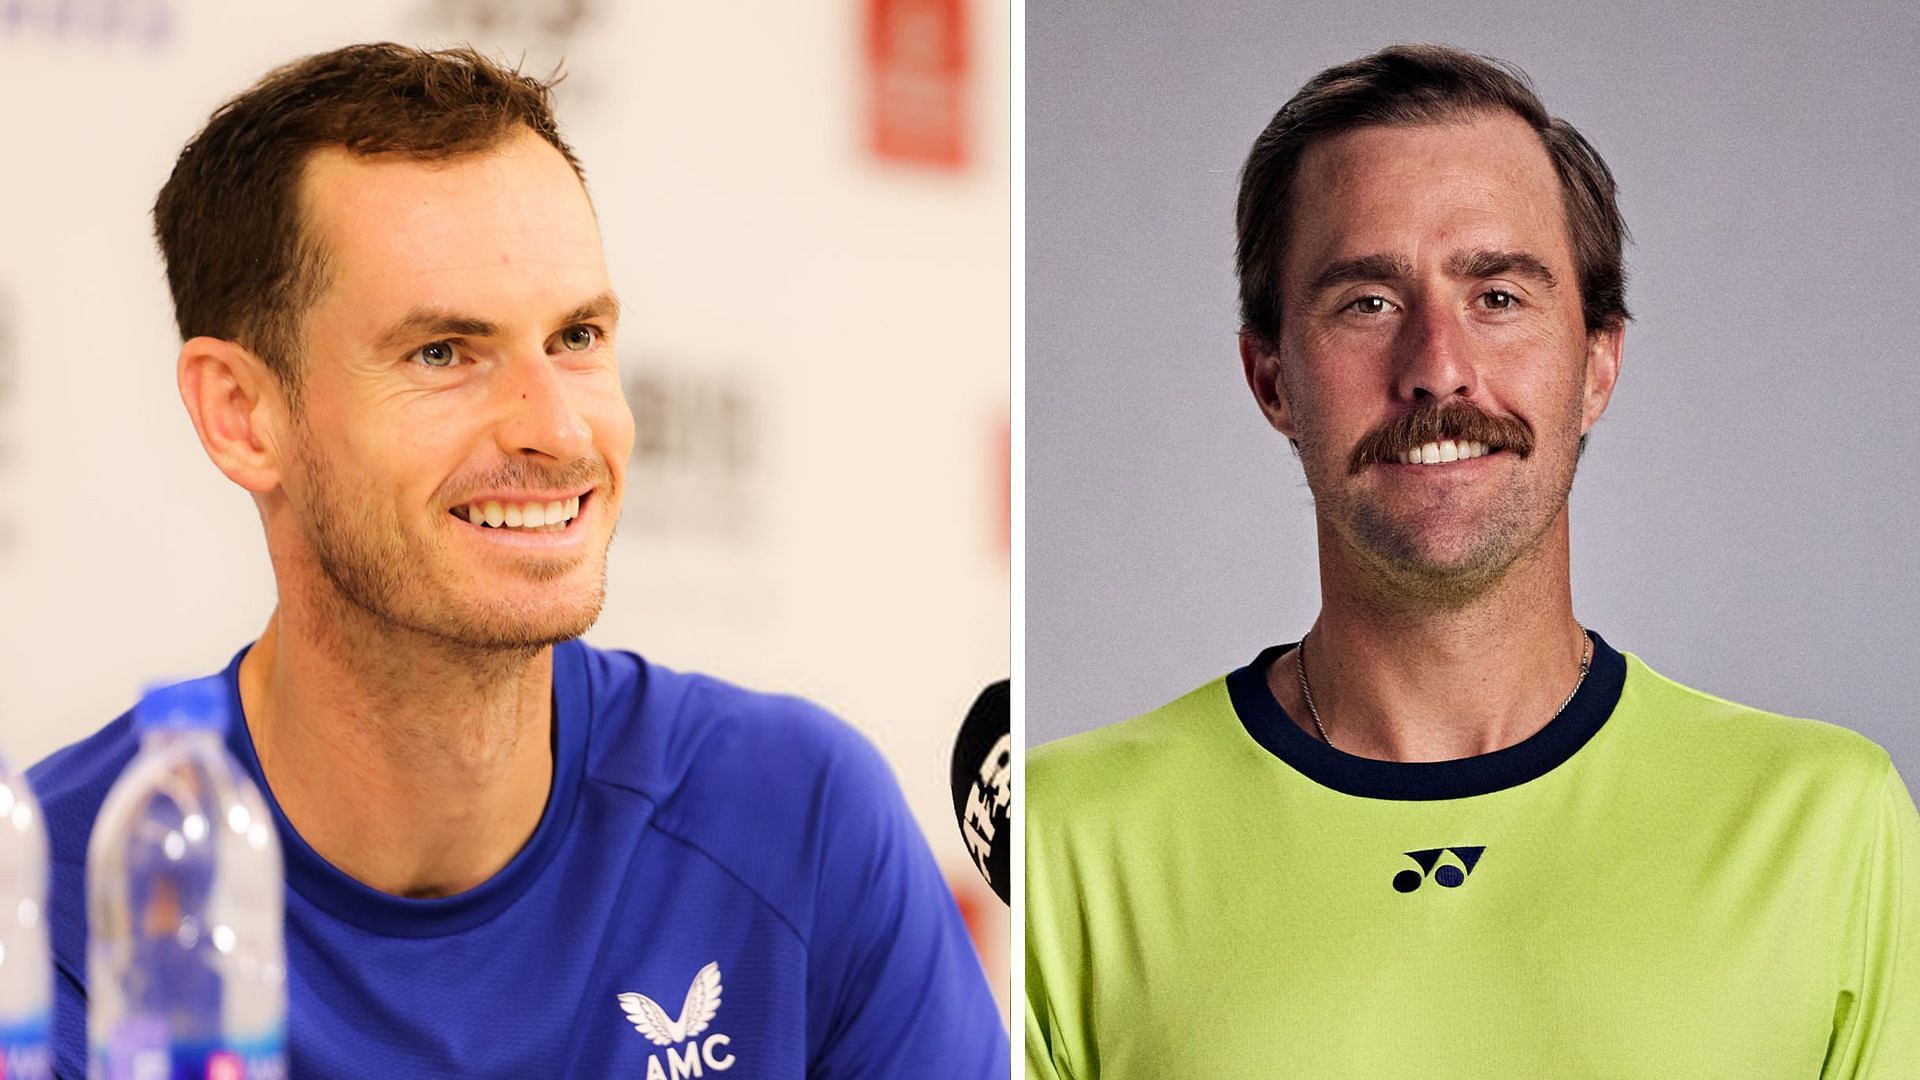 Andy Murray penned a cheeky farewell message for Steve Johnson after the American announced his retirement